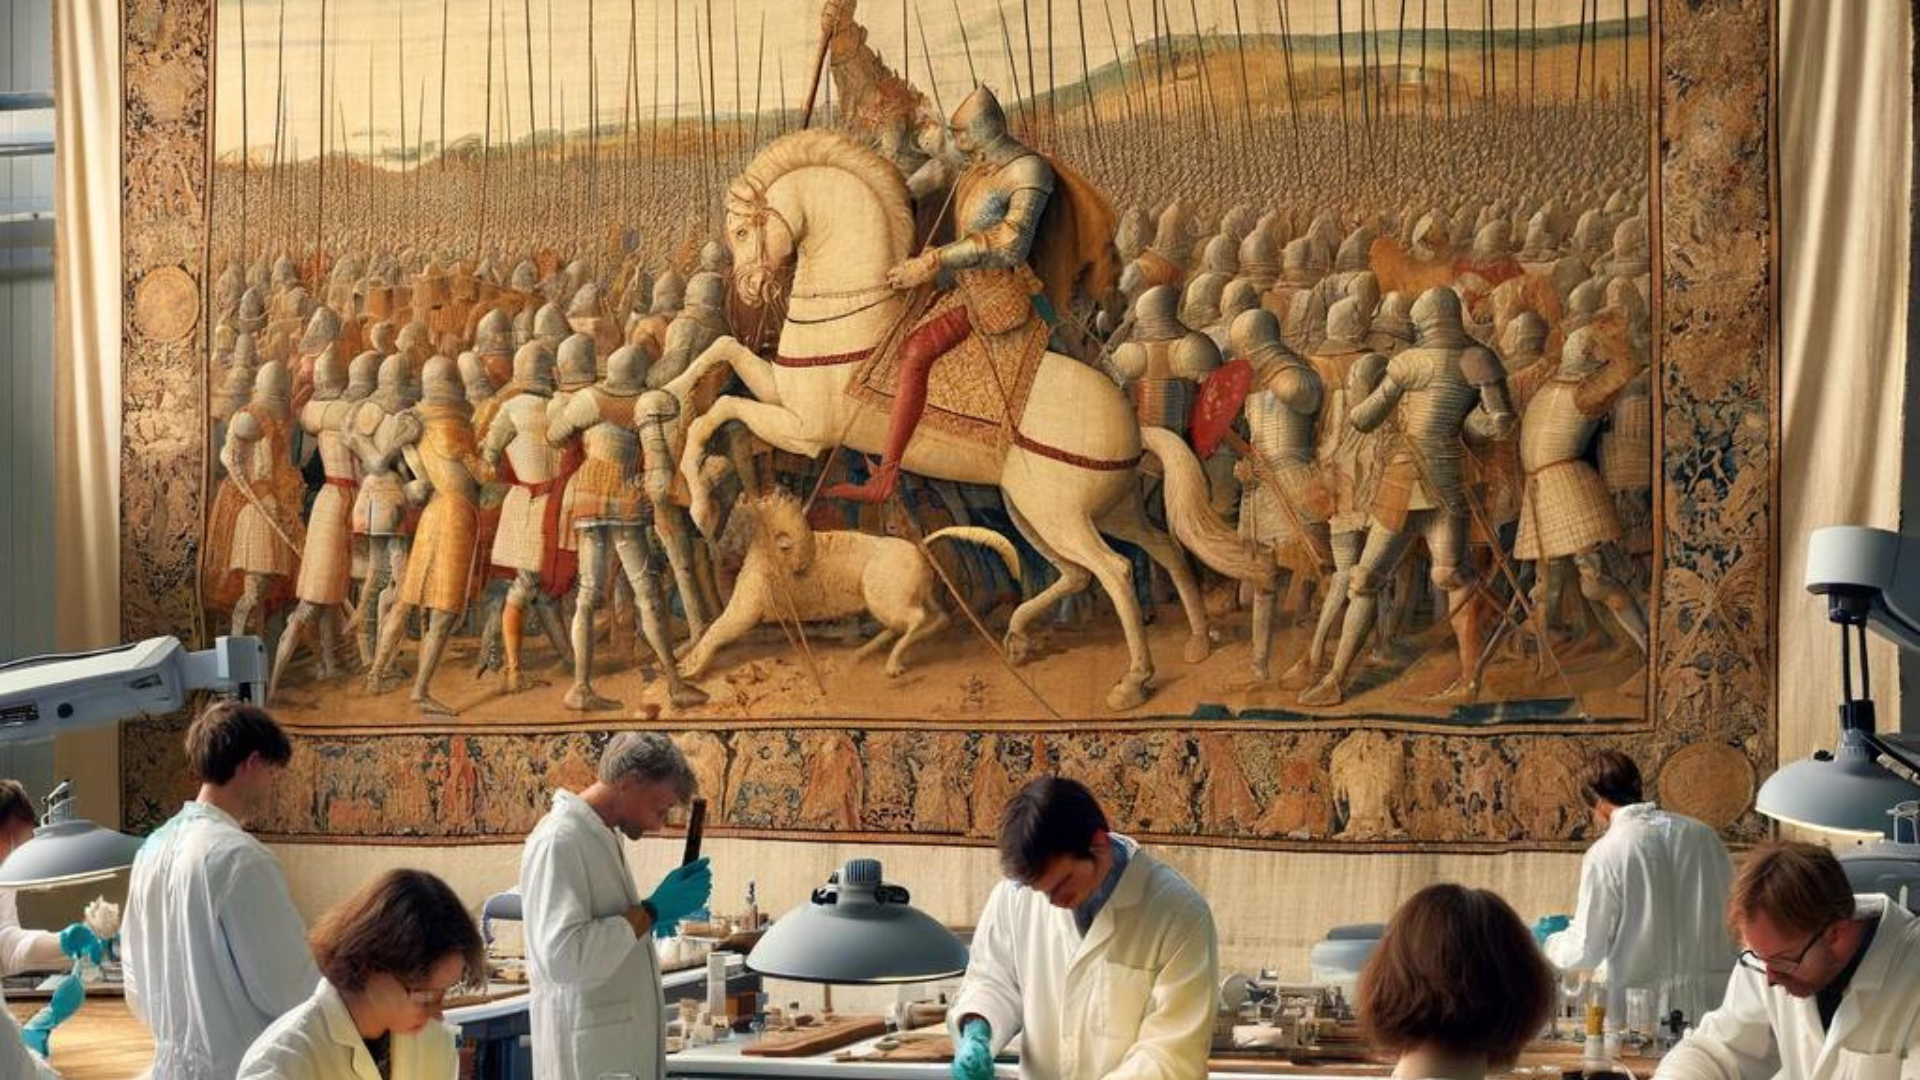 A detailed view of a conservation lab where a medieval battle scene tapestry is being restored. Conservators in white lab coats meticulously use tools to preserve the intricate fabric.